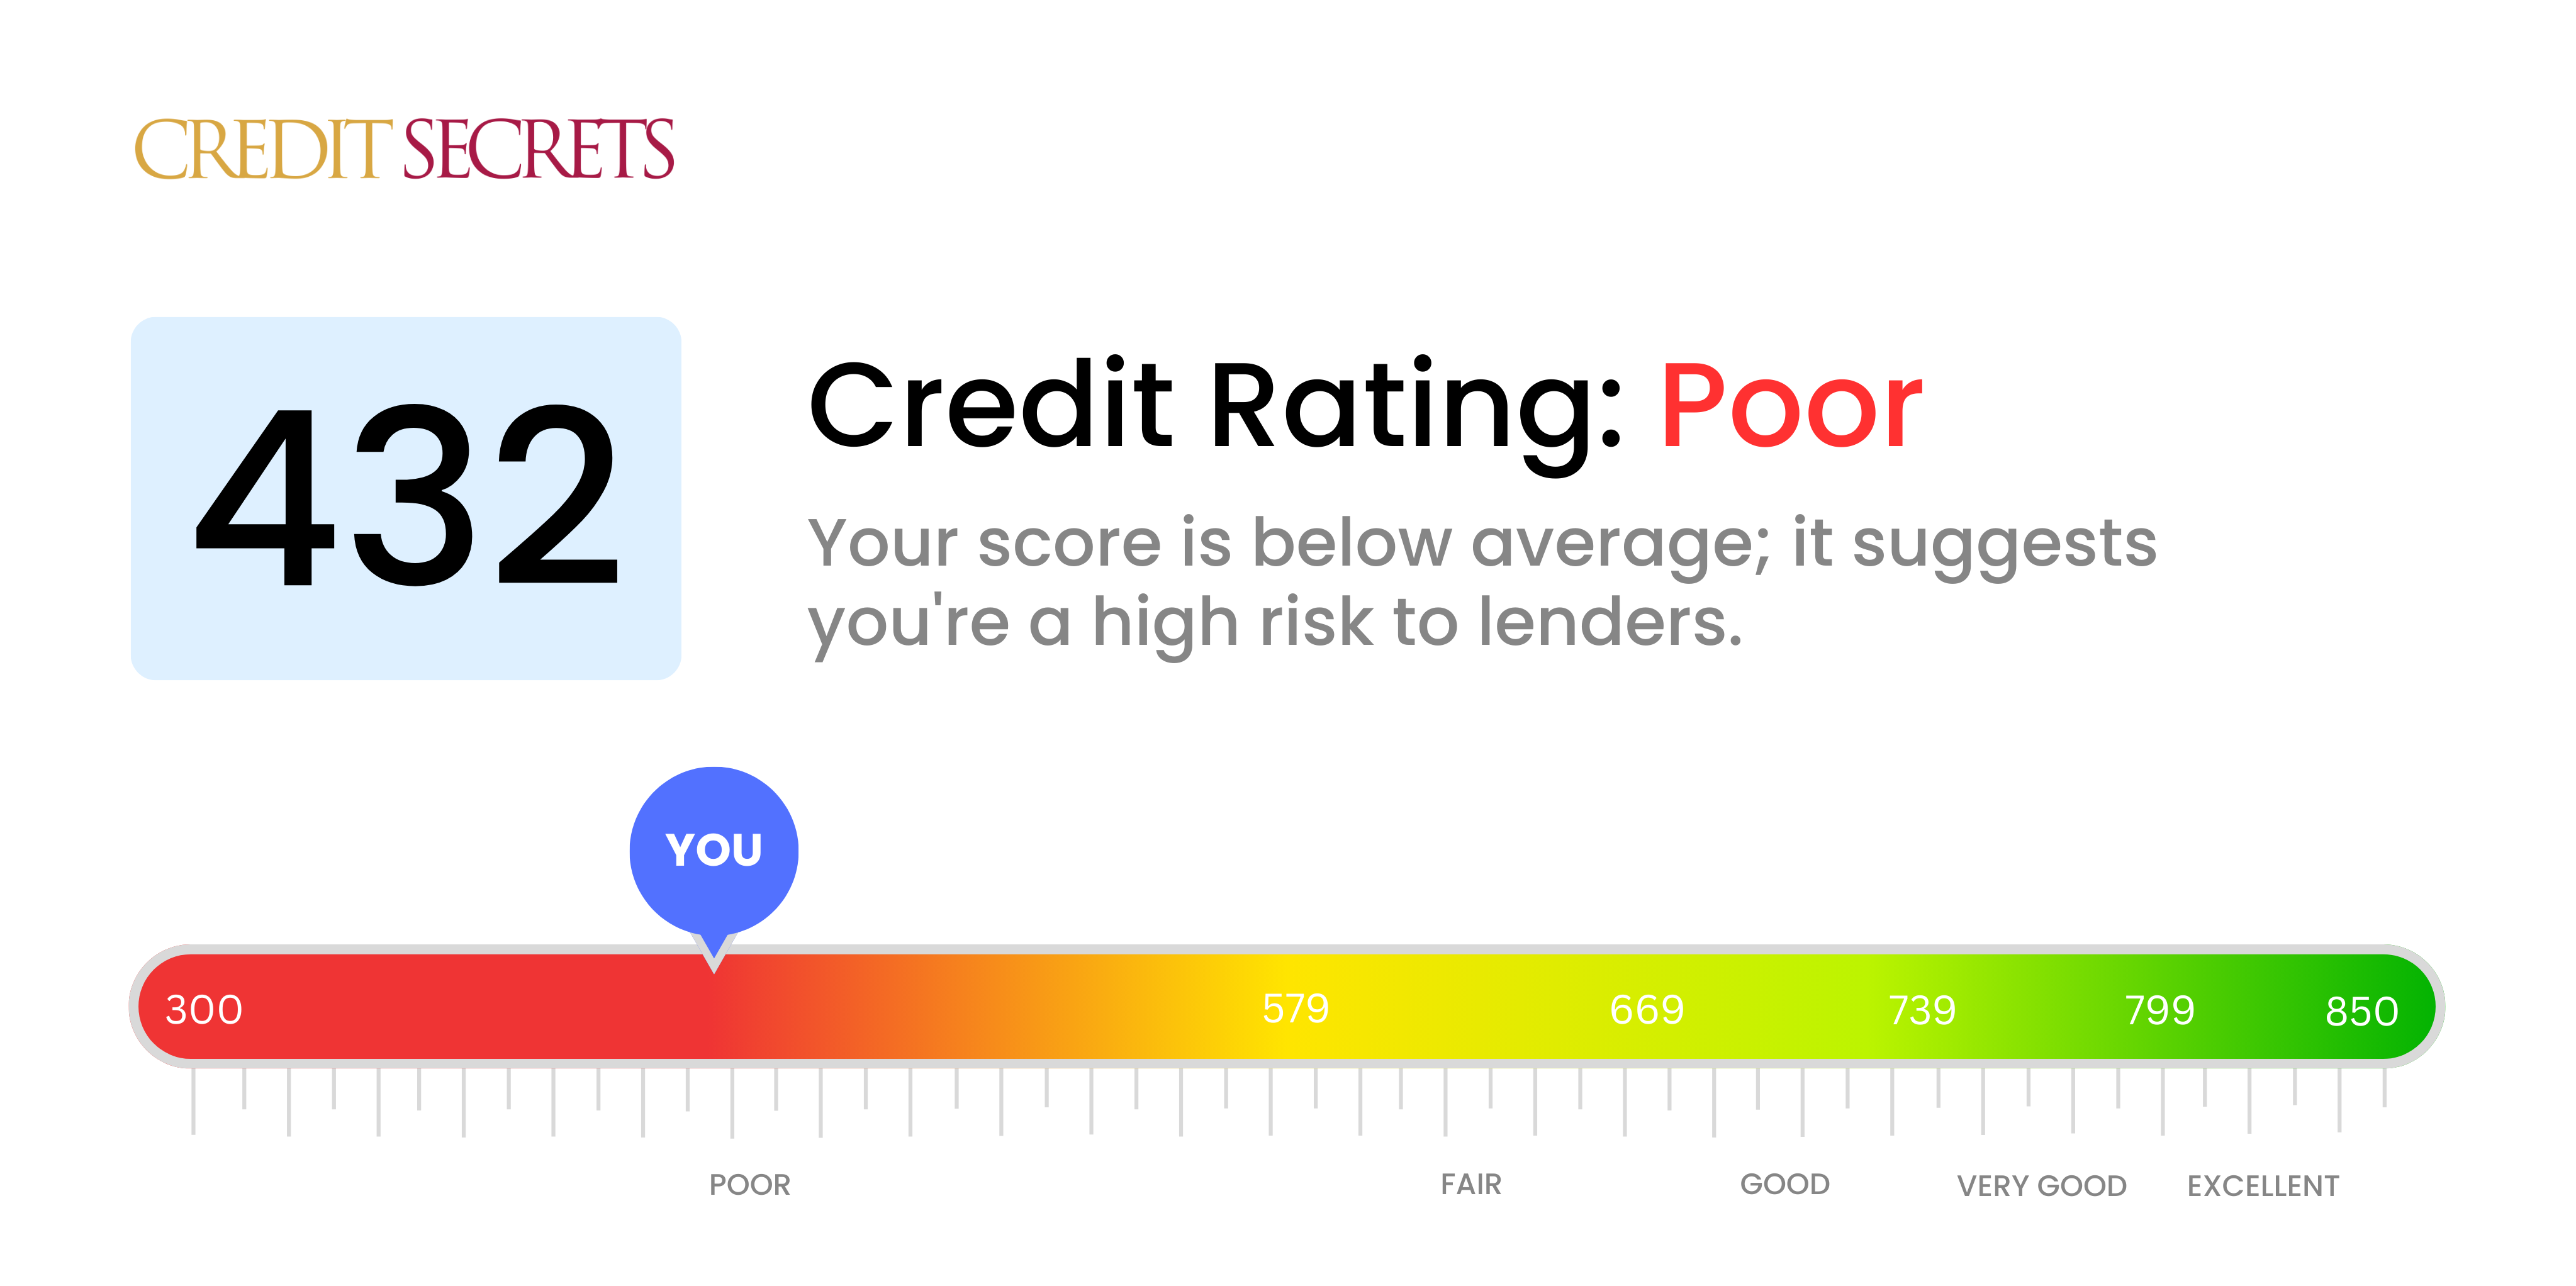 Is 432 a good credit score?